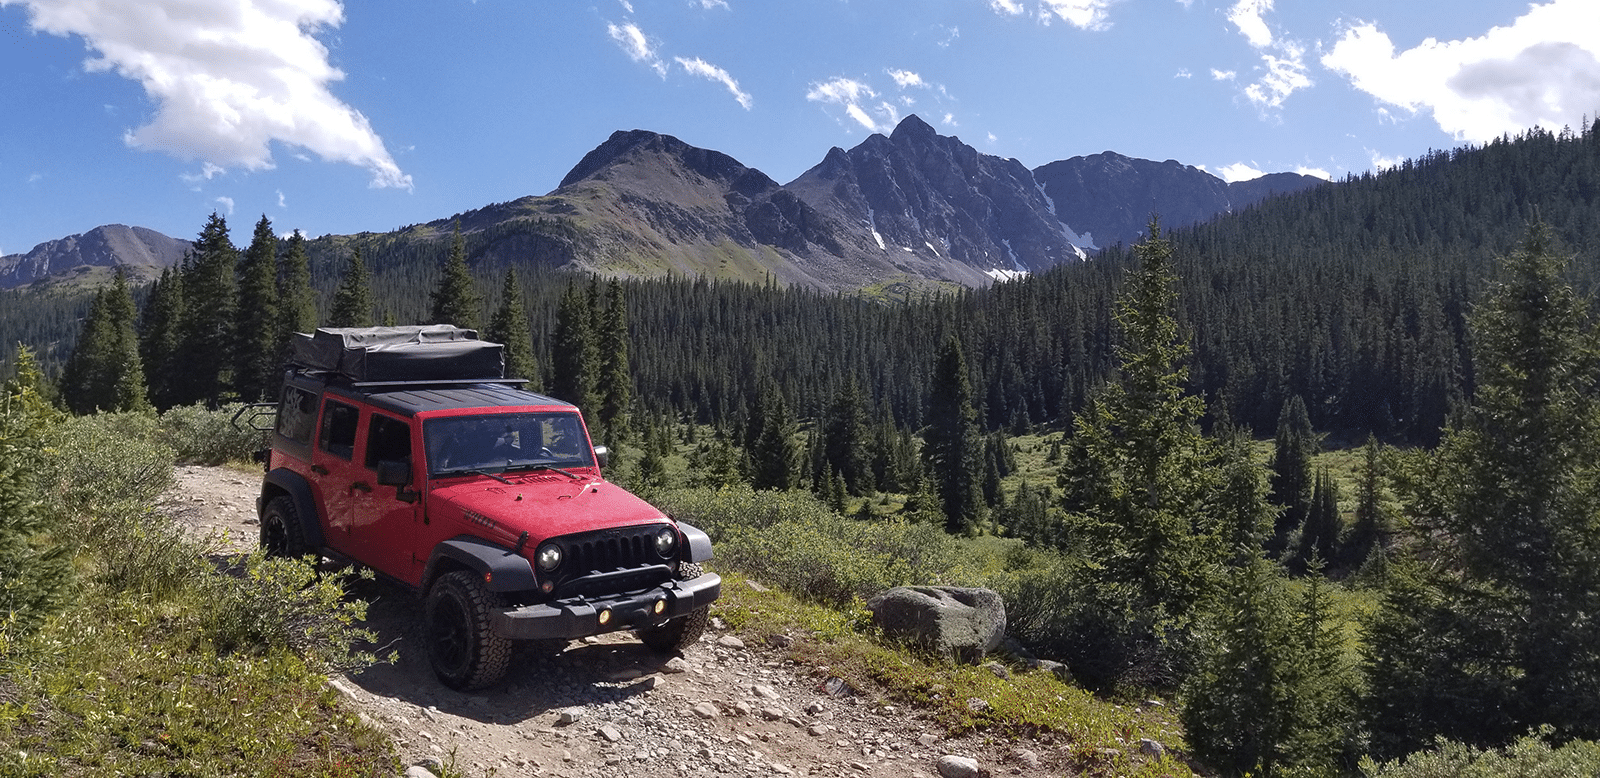 Off-Roading For Beginners: How To Find Trails, What to Bring